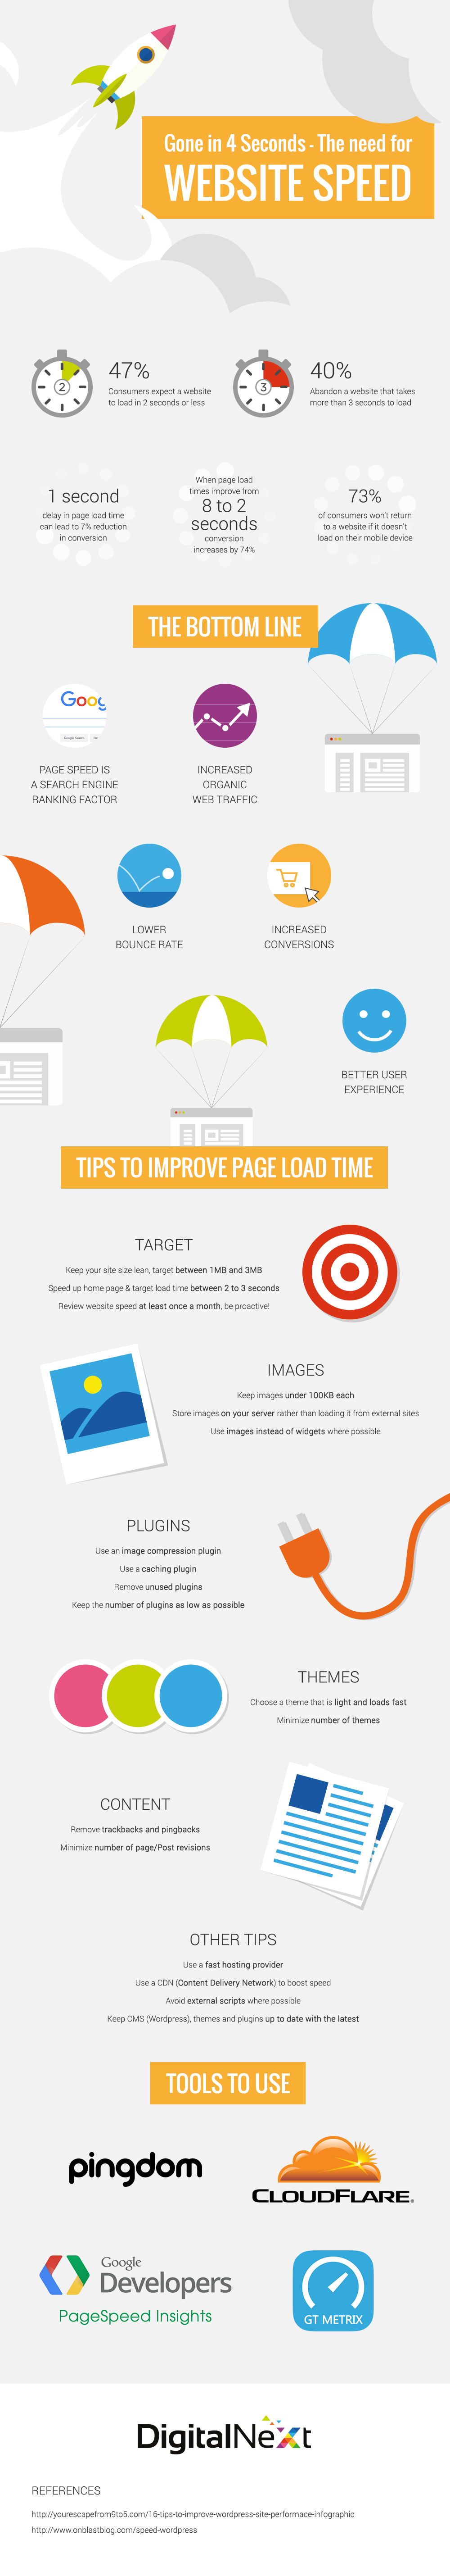 How-to-Improve-Your-Website-Speed-Infographic_png